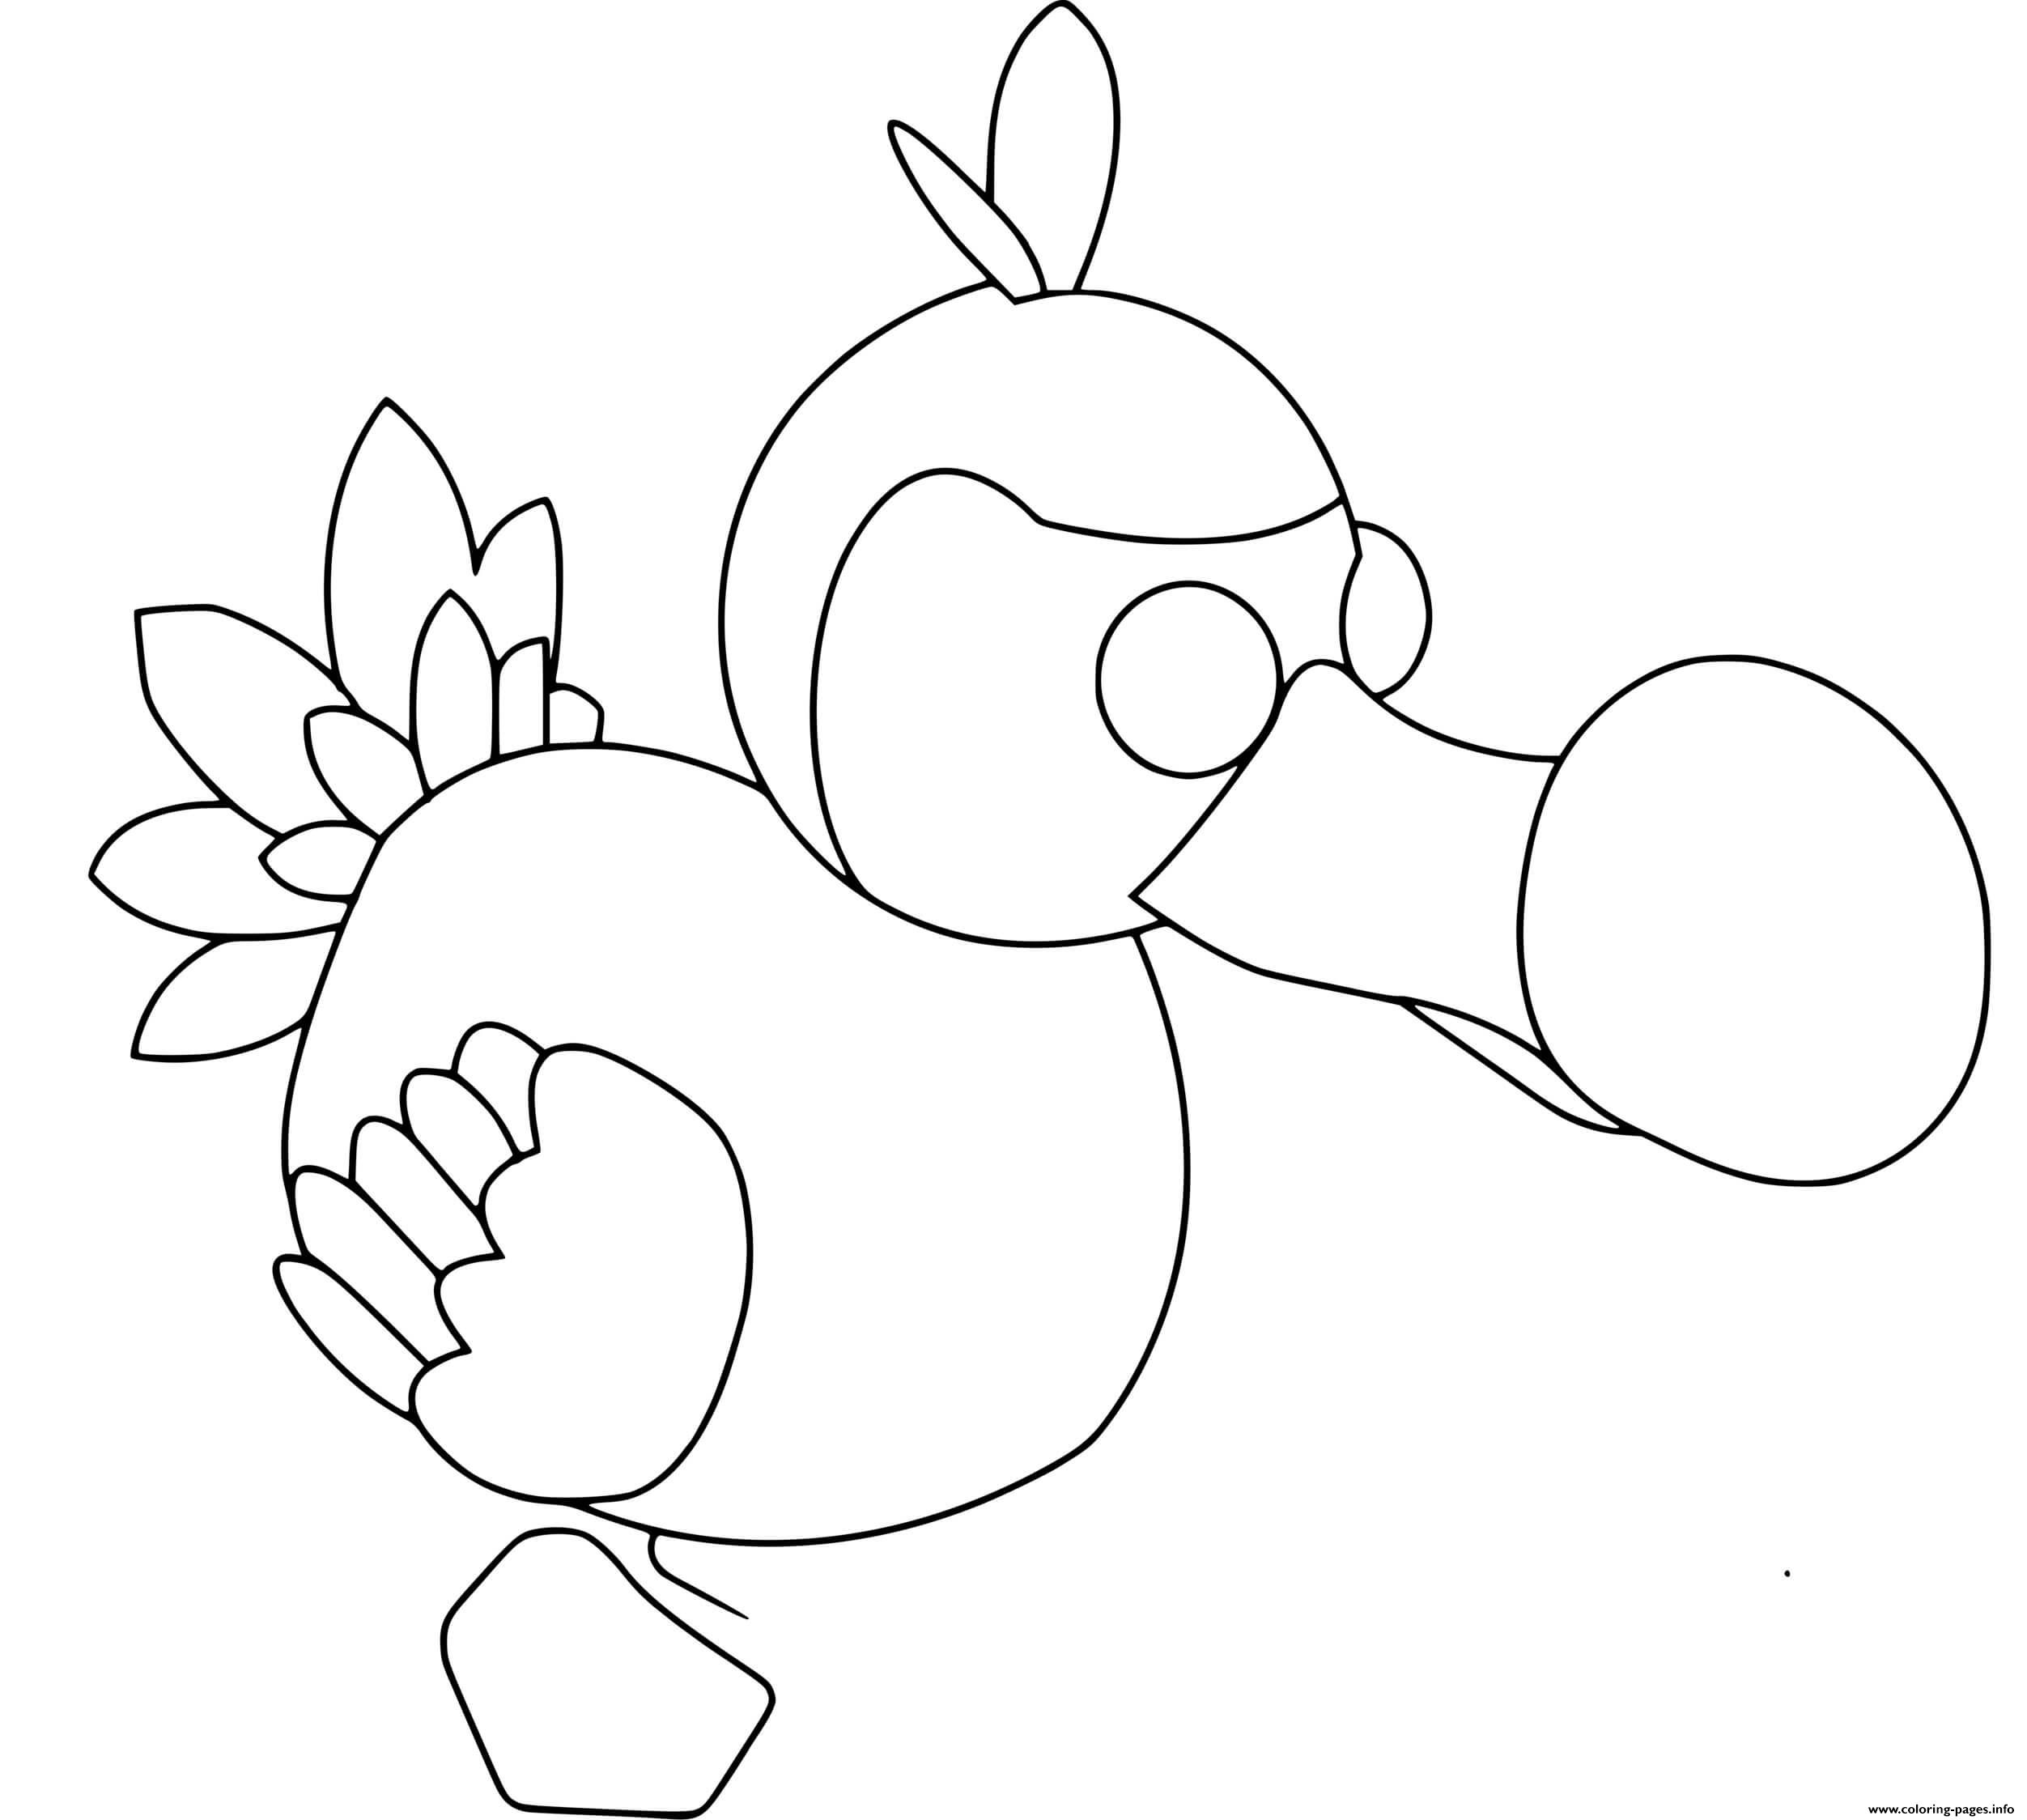 Roblox Adopt Me Dodo Coloring Pages Printable - giraffe roblox coloring pages adopt me